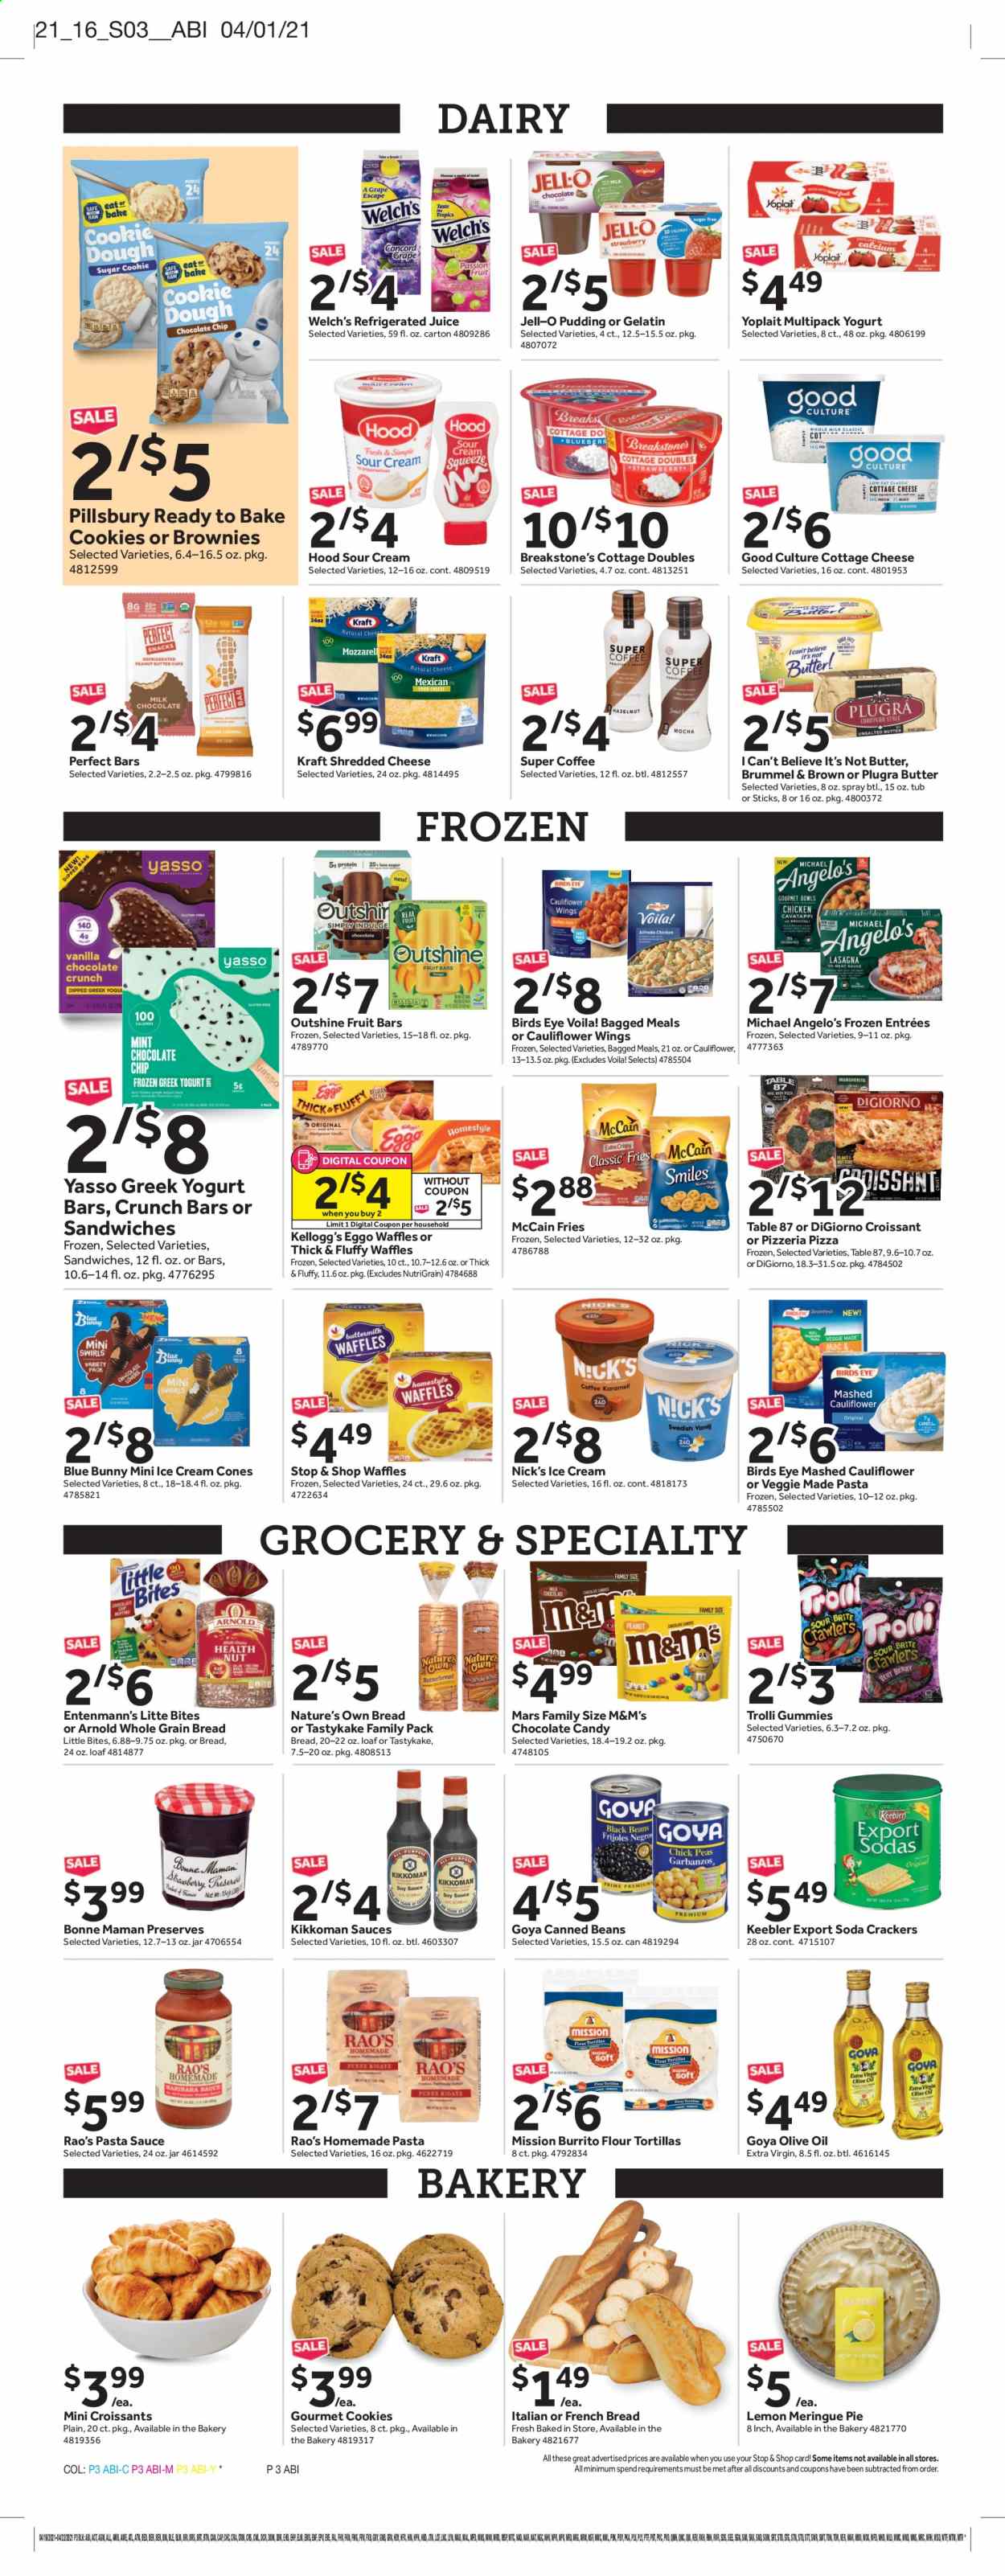 thumbnail - Stop & Shop Flyer - 04/16/2021 - 04/22/2021 - Sales products - tortillas, pie, croissant, flour tortillas, brownies, waffles, Entenmann's, cauliflower, peas, Welch's, pizza, pasta sauce, Pillsbury, Bird's Eye, lasagna meal, Kraft®, cottage cheese, shredded cheese, greek yoghurt, pudding, Yoplait, butter, I Can't Believe It's Not Butter, sour cream, ice cream, Nick's Ice Cream, Blue Bunny, McCain, potato fries, cookie dough, cookies, Trolli, Mars, M&M's, crackers, Kellogg's, chocolate candies, Little Bites, Keebler, sugar, Jell-O, Goya, Kikkoman, extra virgin olive oil, olive oil, oil, soda, juice, coffee, Brite, Nature's Own. Page 3.